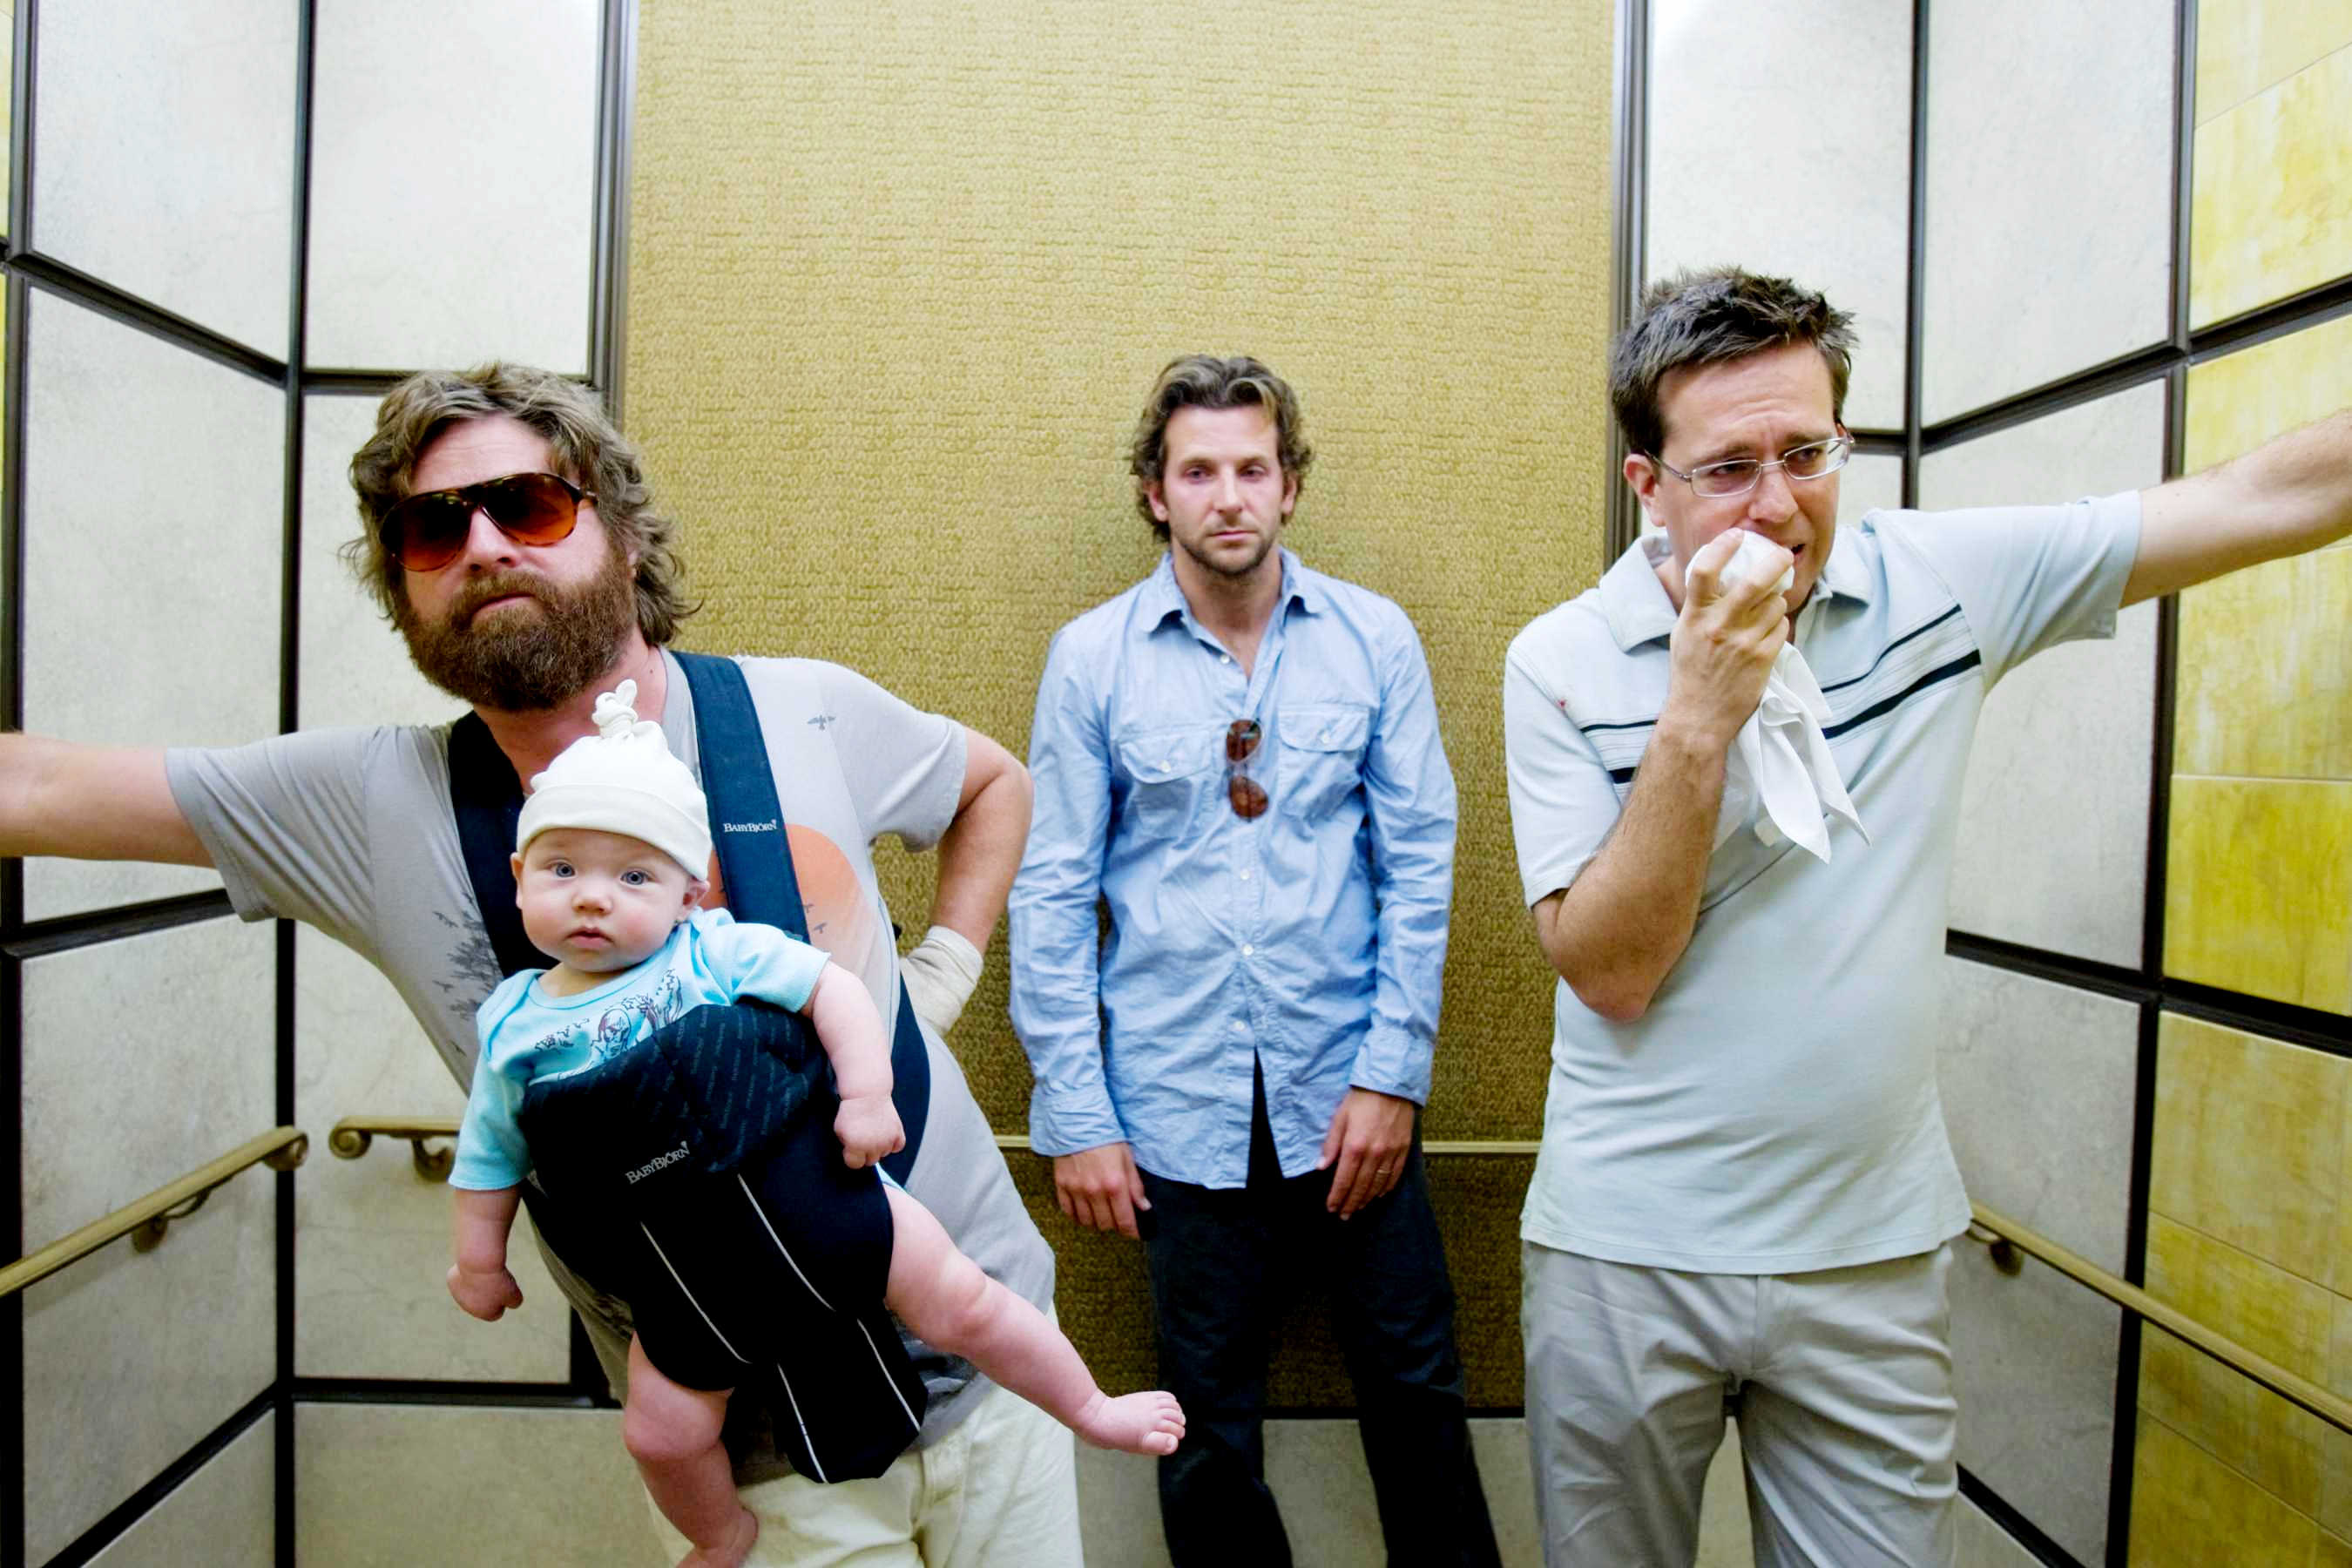 The Hangover wallpaper picture